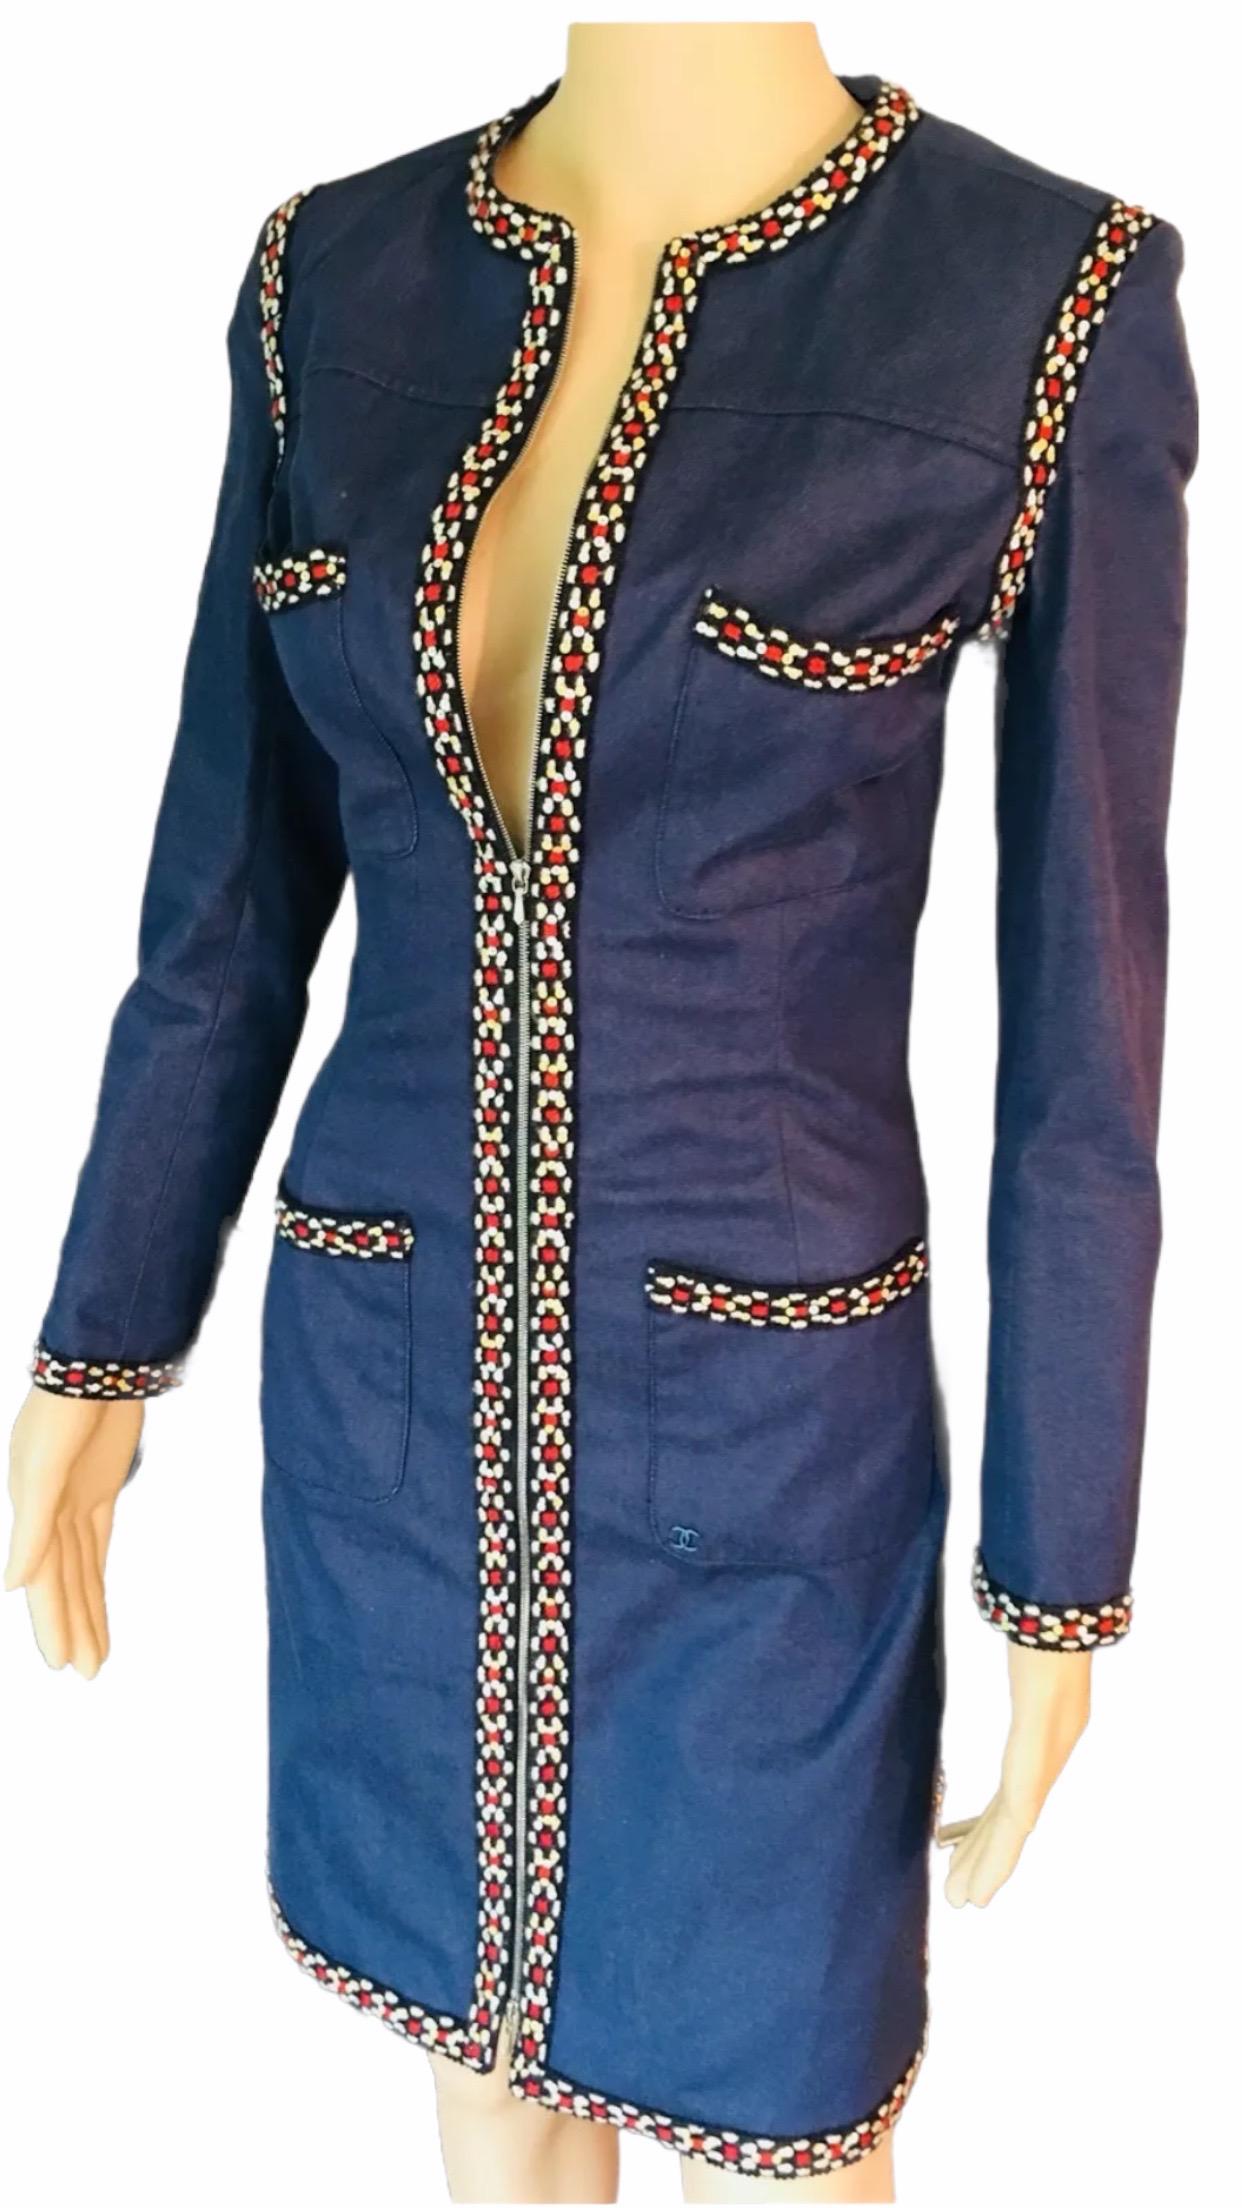 Chanel denim knee-length coat with sequin embellished trim, structured shoulders, long sleeves, four patch pockets featuring interlocking CC adornment and exposed zip closure at front. From the Fall 2004 Collection. Very versatile piece could be